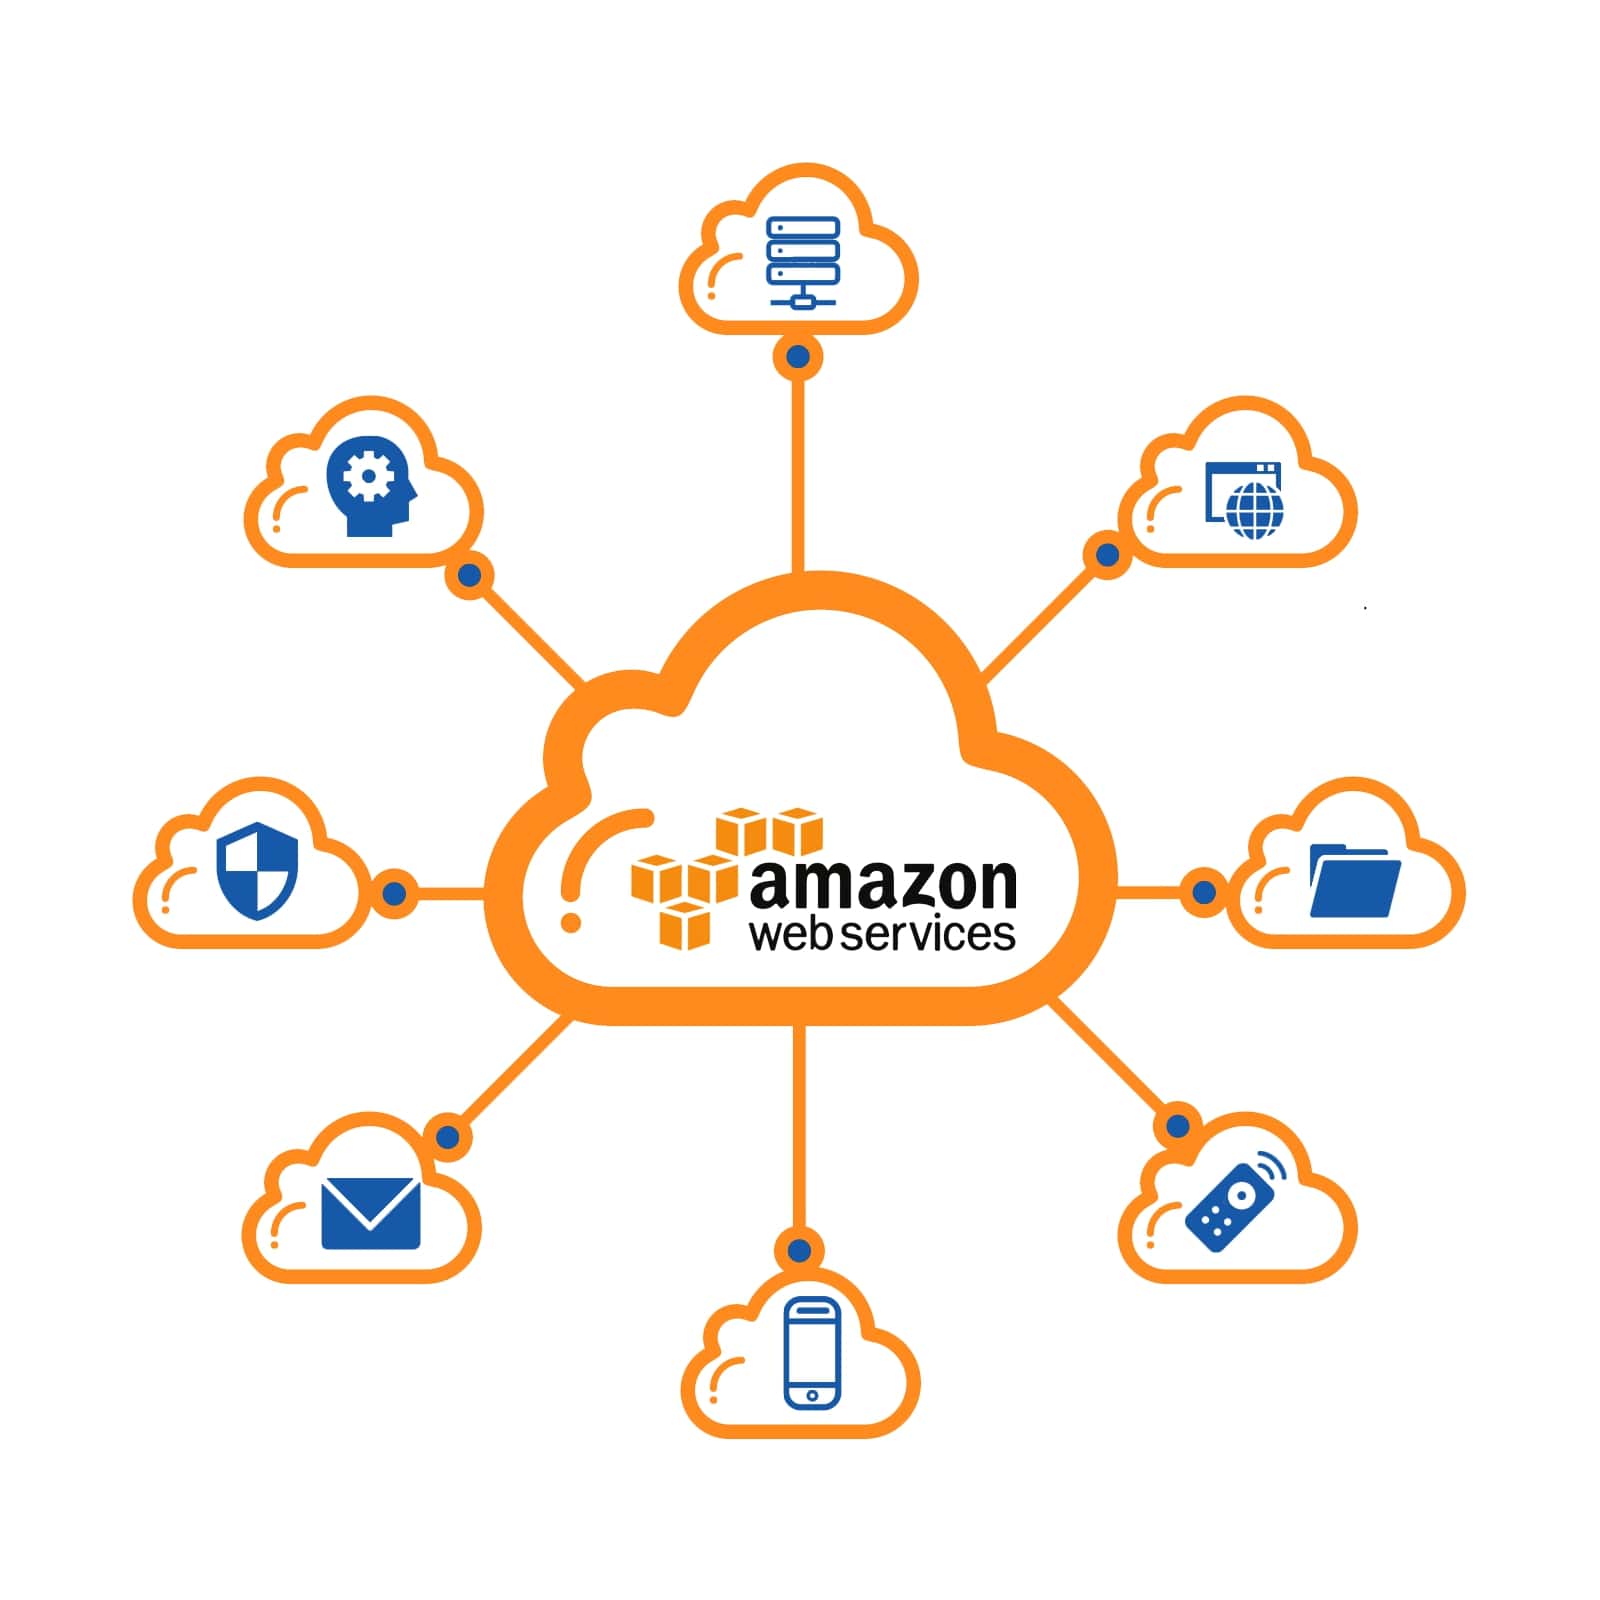 Amazon Web Services (AWS) An Infrastructure for Digital Marketing​